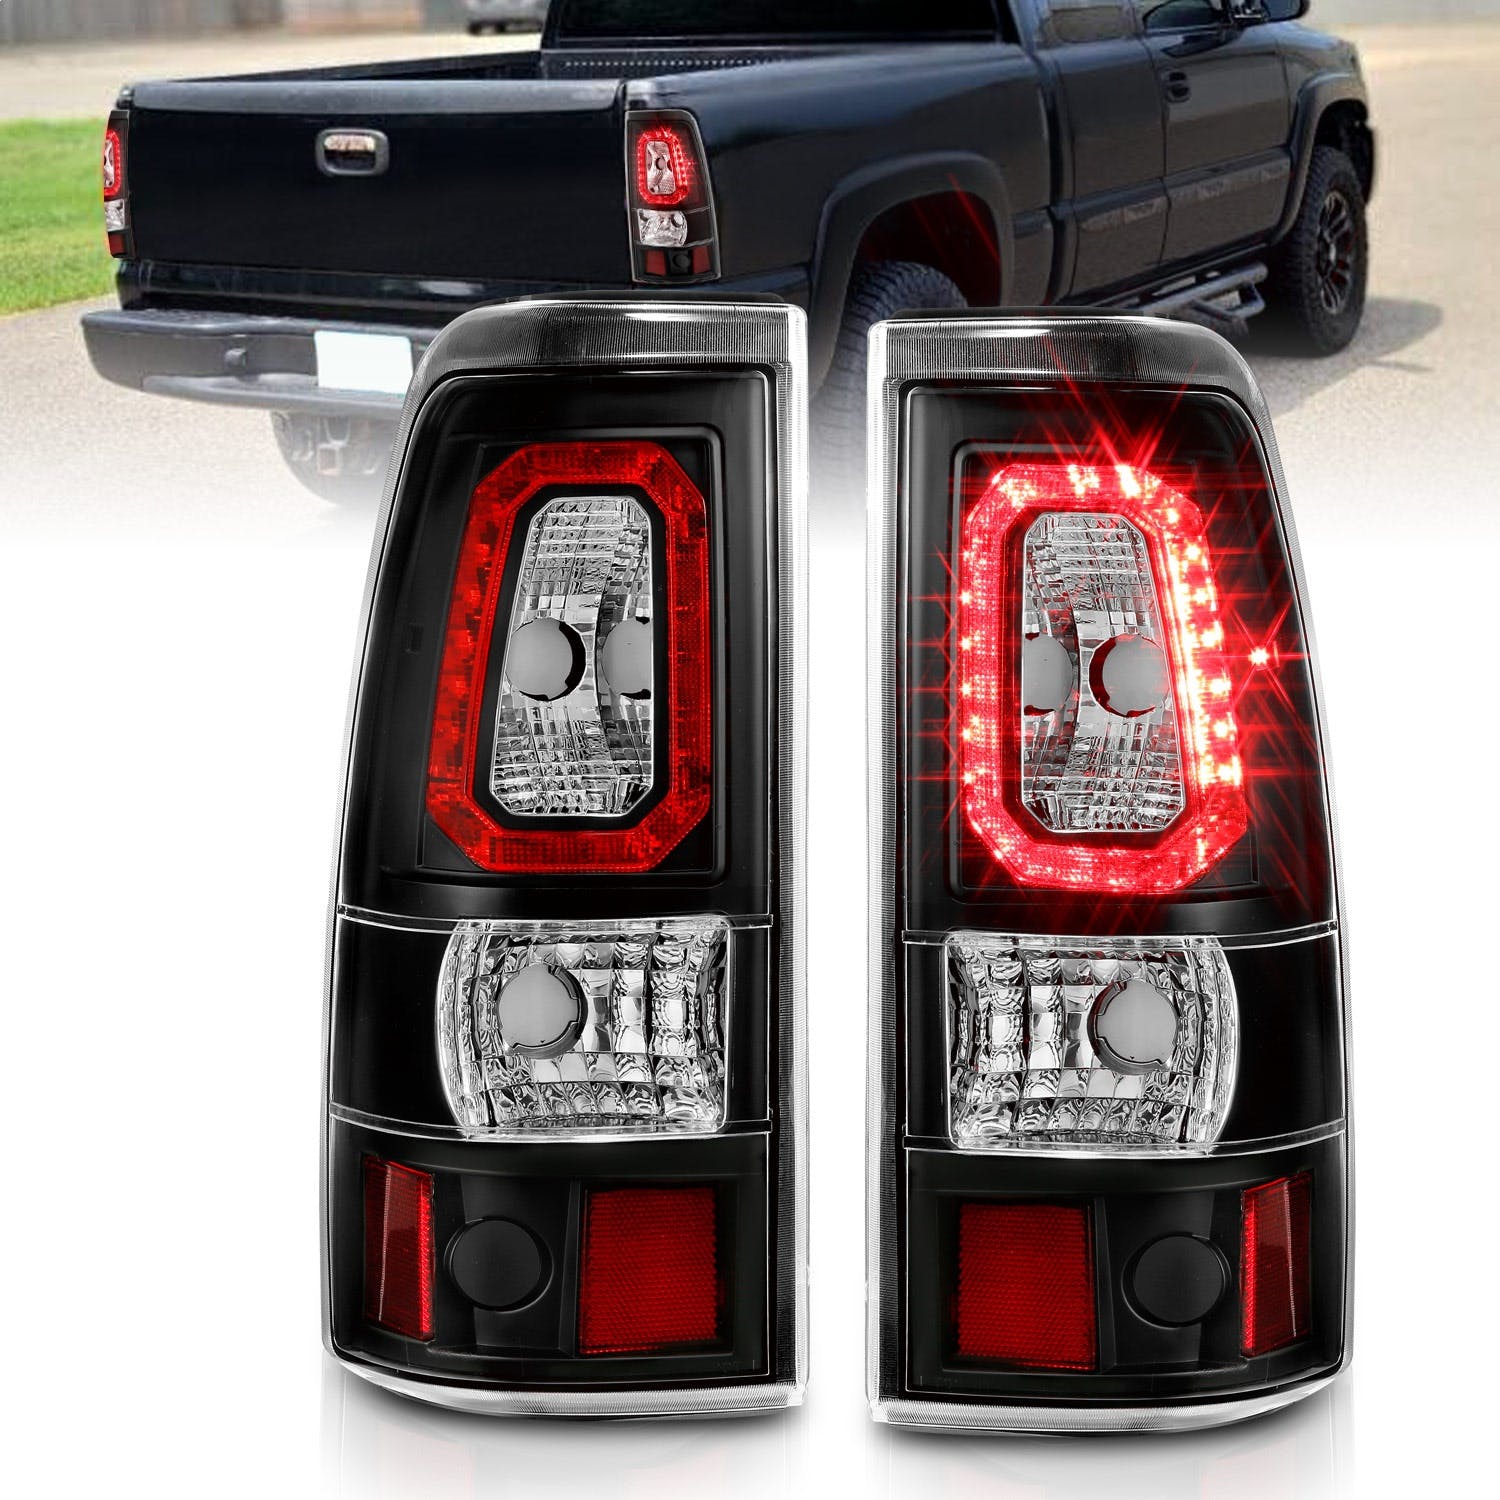 AnzoUSA 311327 LED Taillights Plank Style Black with Clear Lens